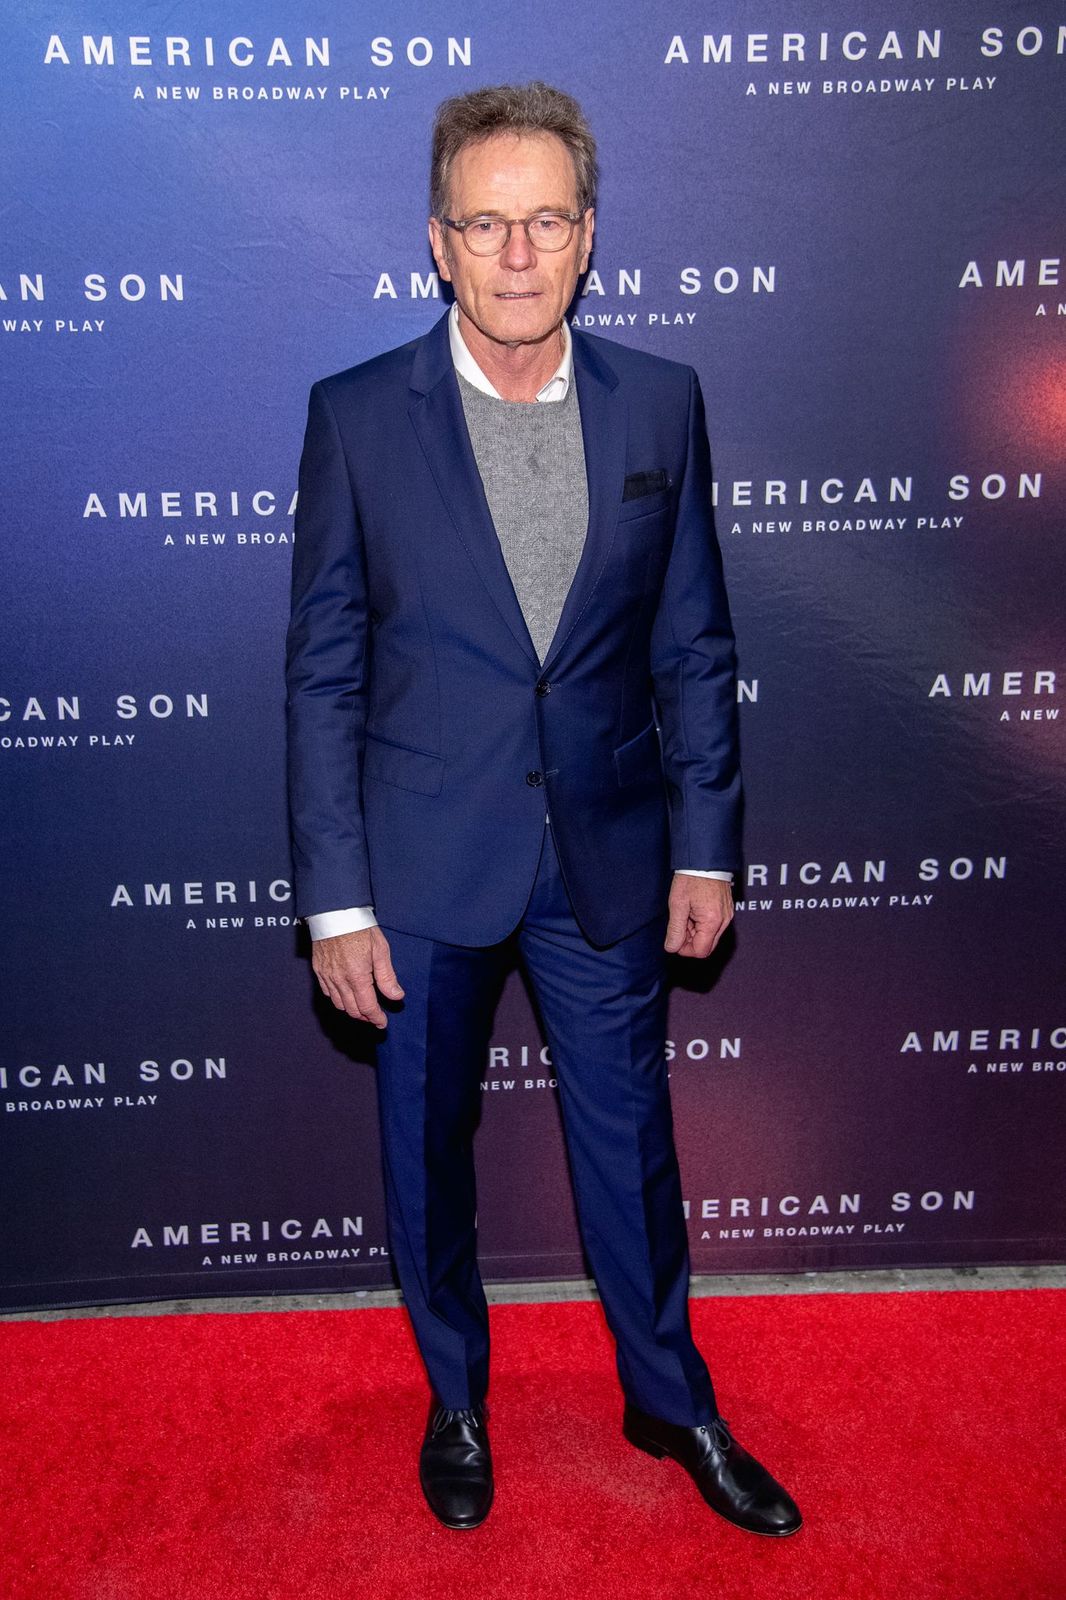 Bryan Cranston at the opening night of "American Son" on November 04, 2018 | Photo: Getty Images